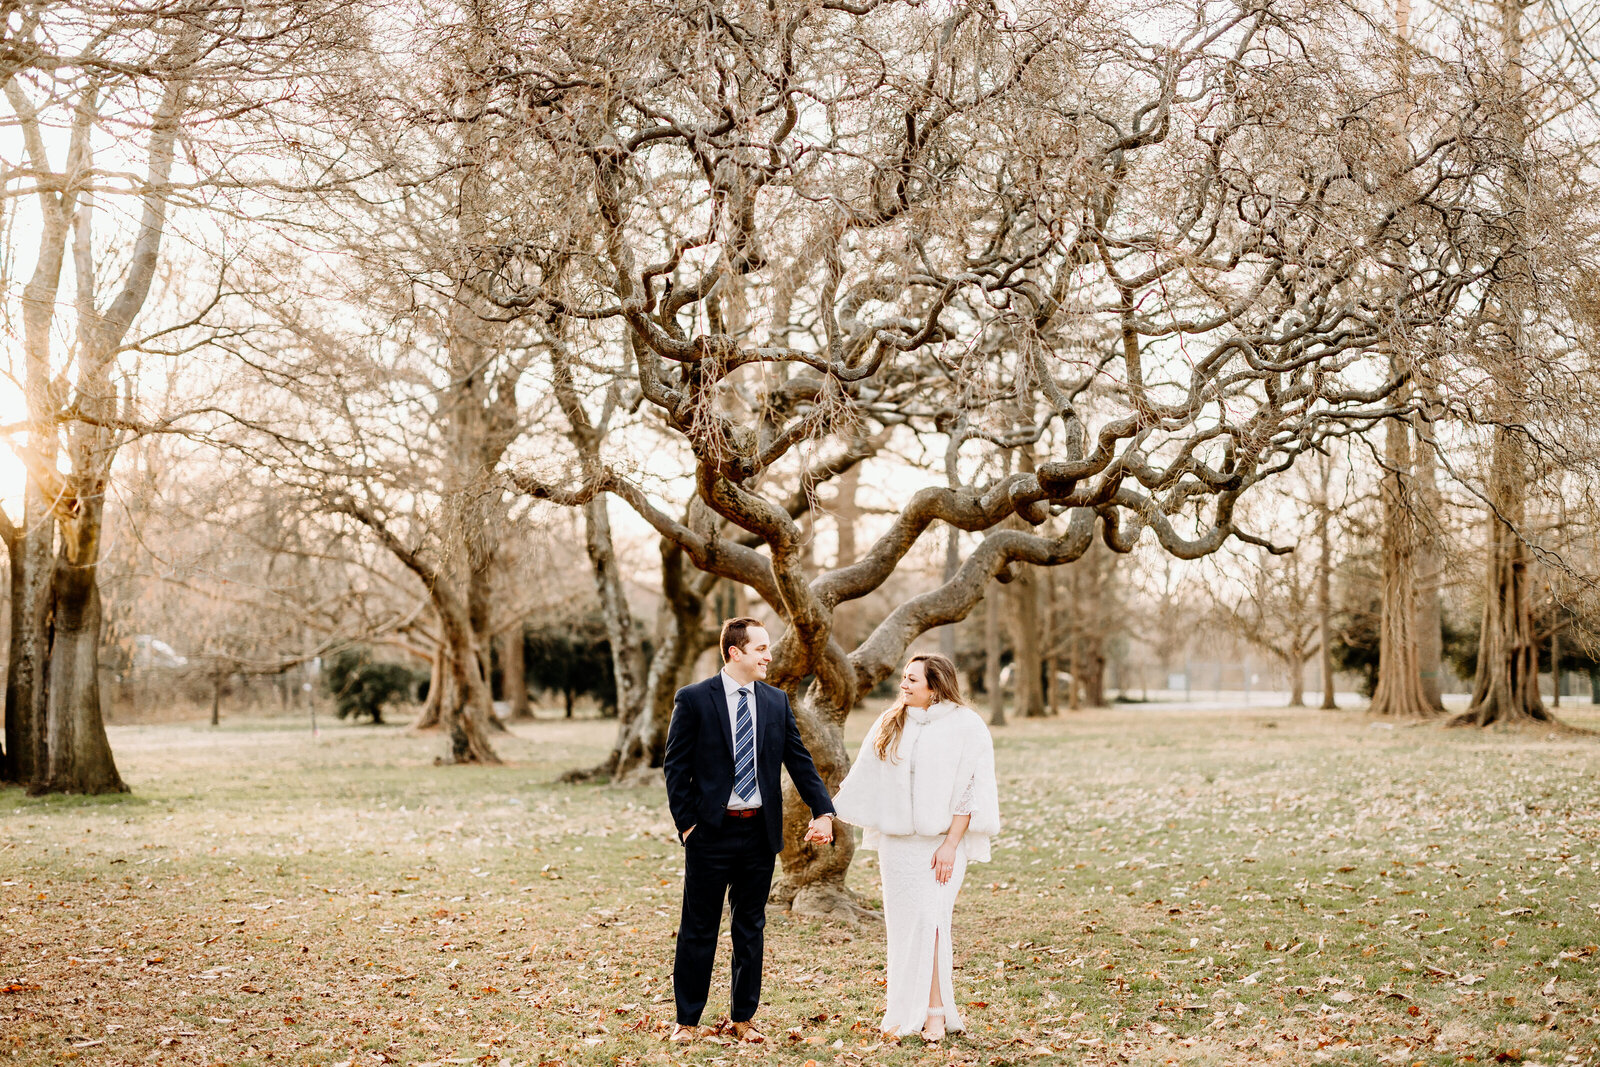 couple at horticultural center trees